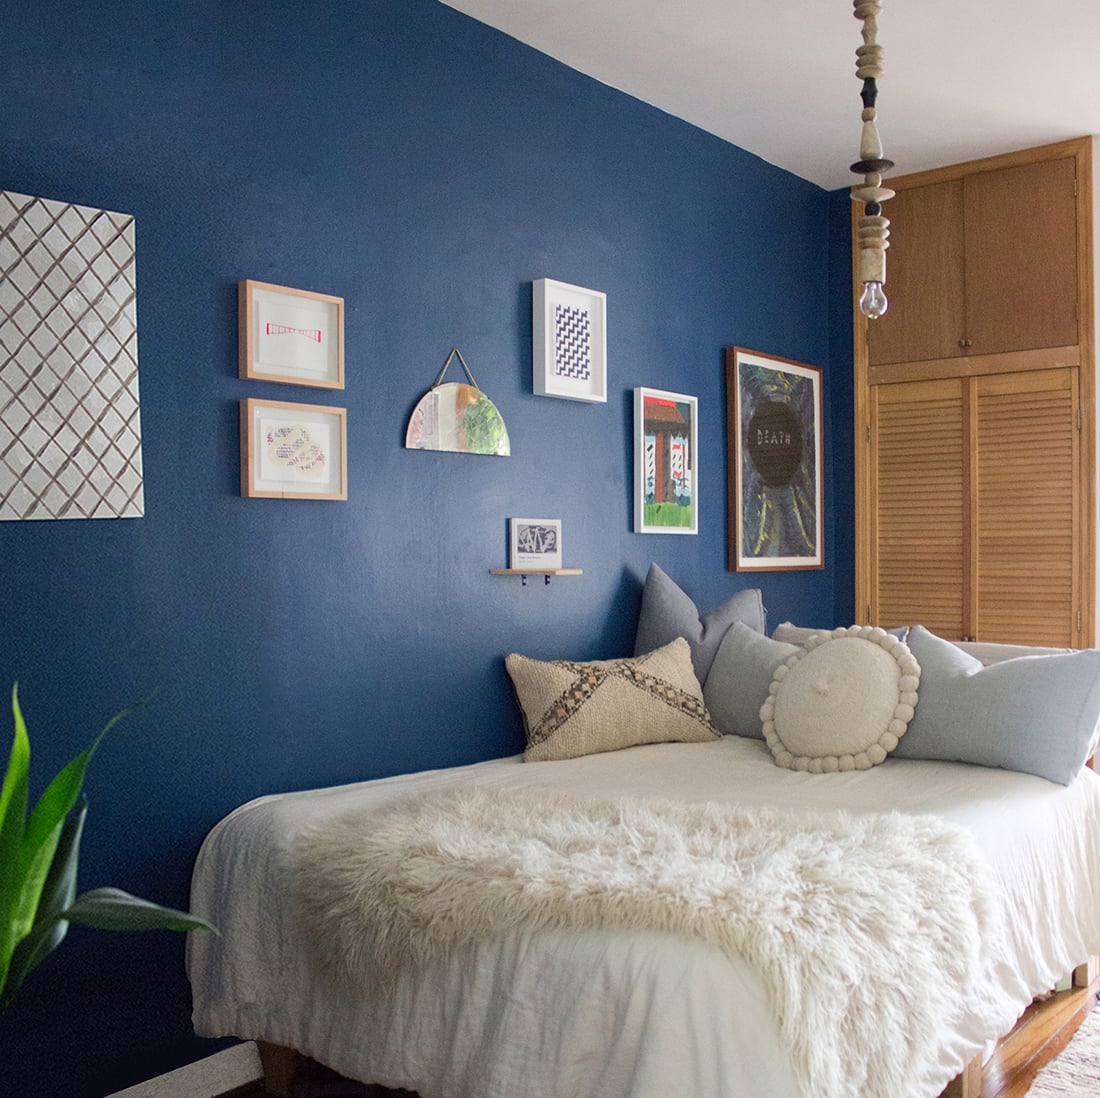 In this installment of the Wall Around the World home tour series, Mallory gives us the inside scoop on her global cool gallery walls and California-cool-meets-Mid-Century Modern home decor. • Little Gold Pixel • Photo © Mallory Fletchall